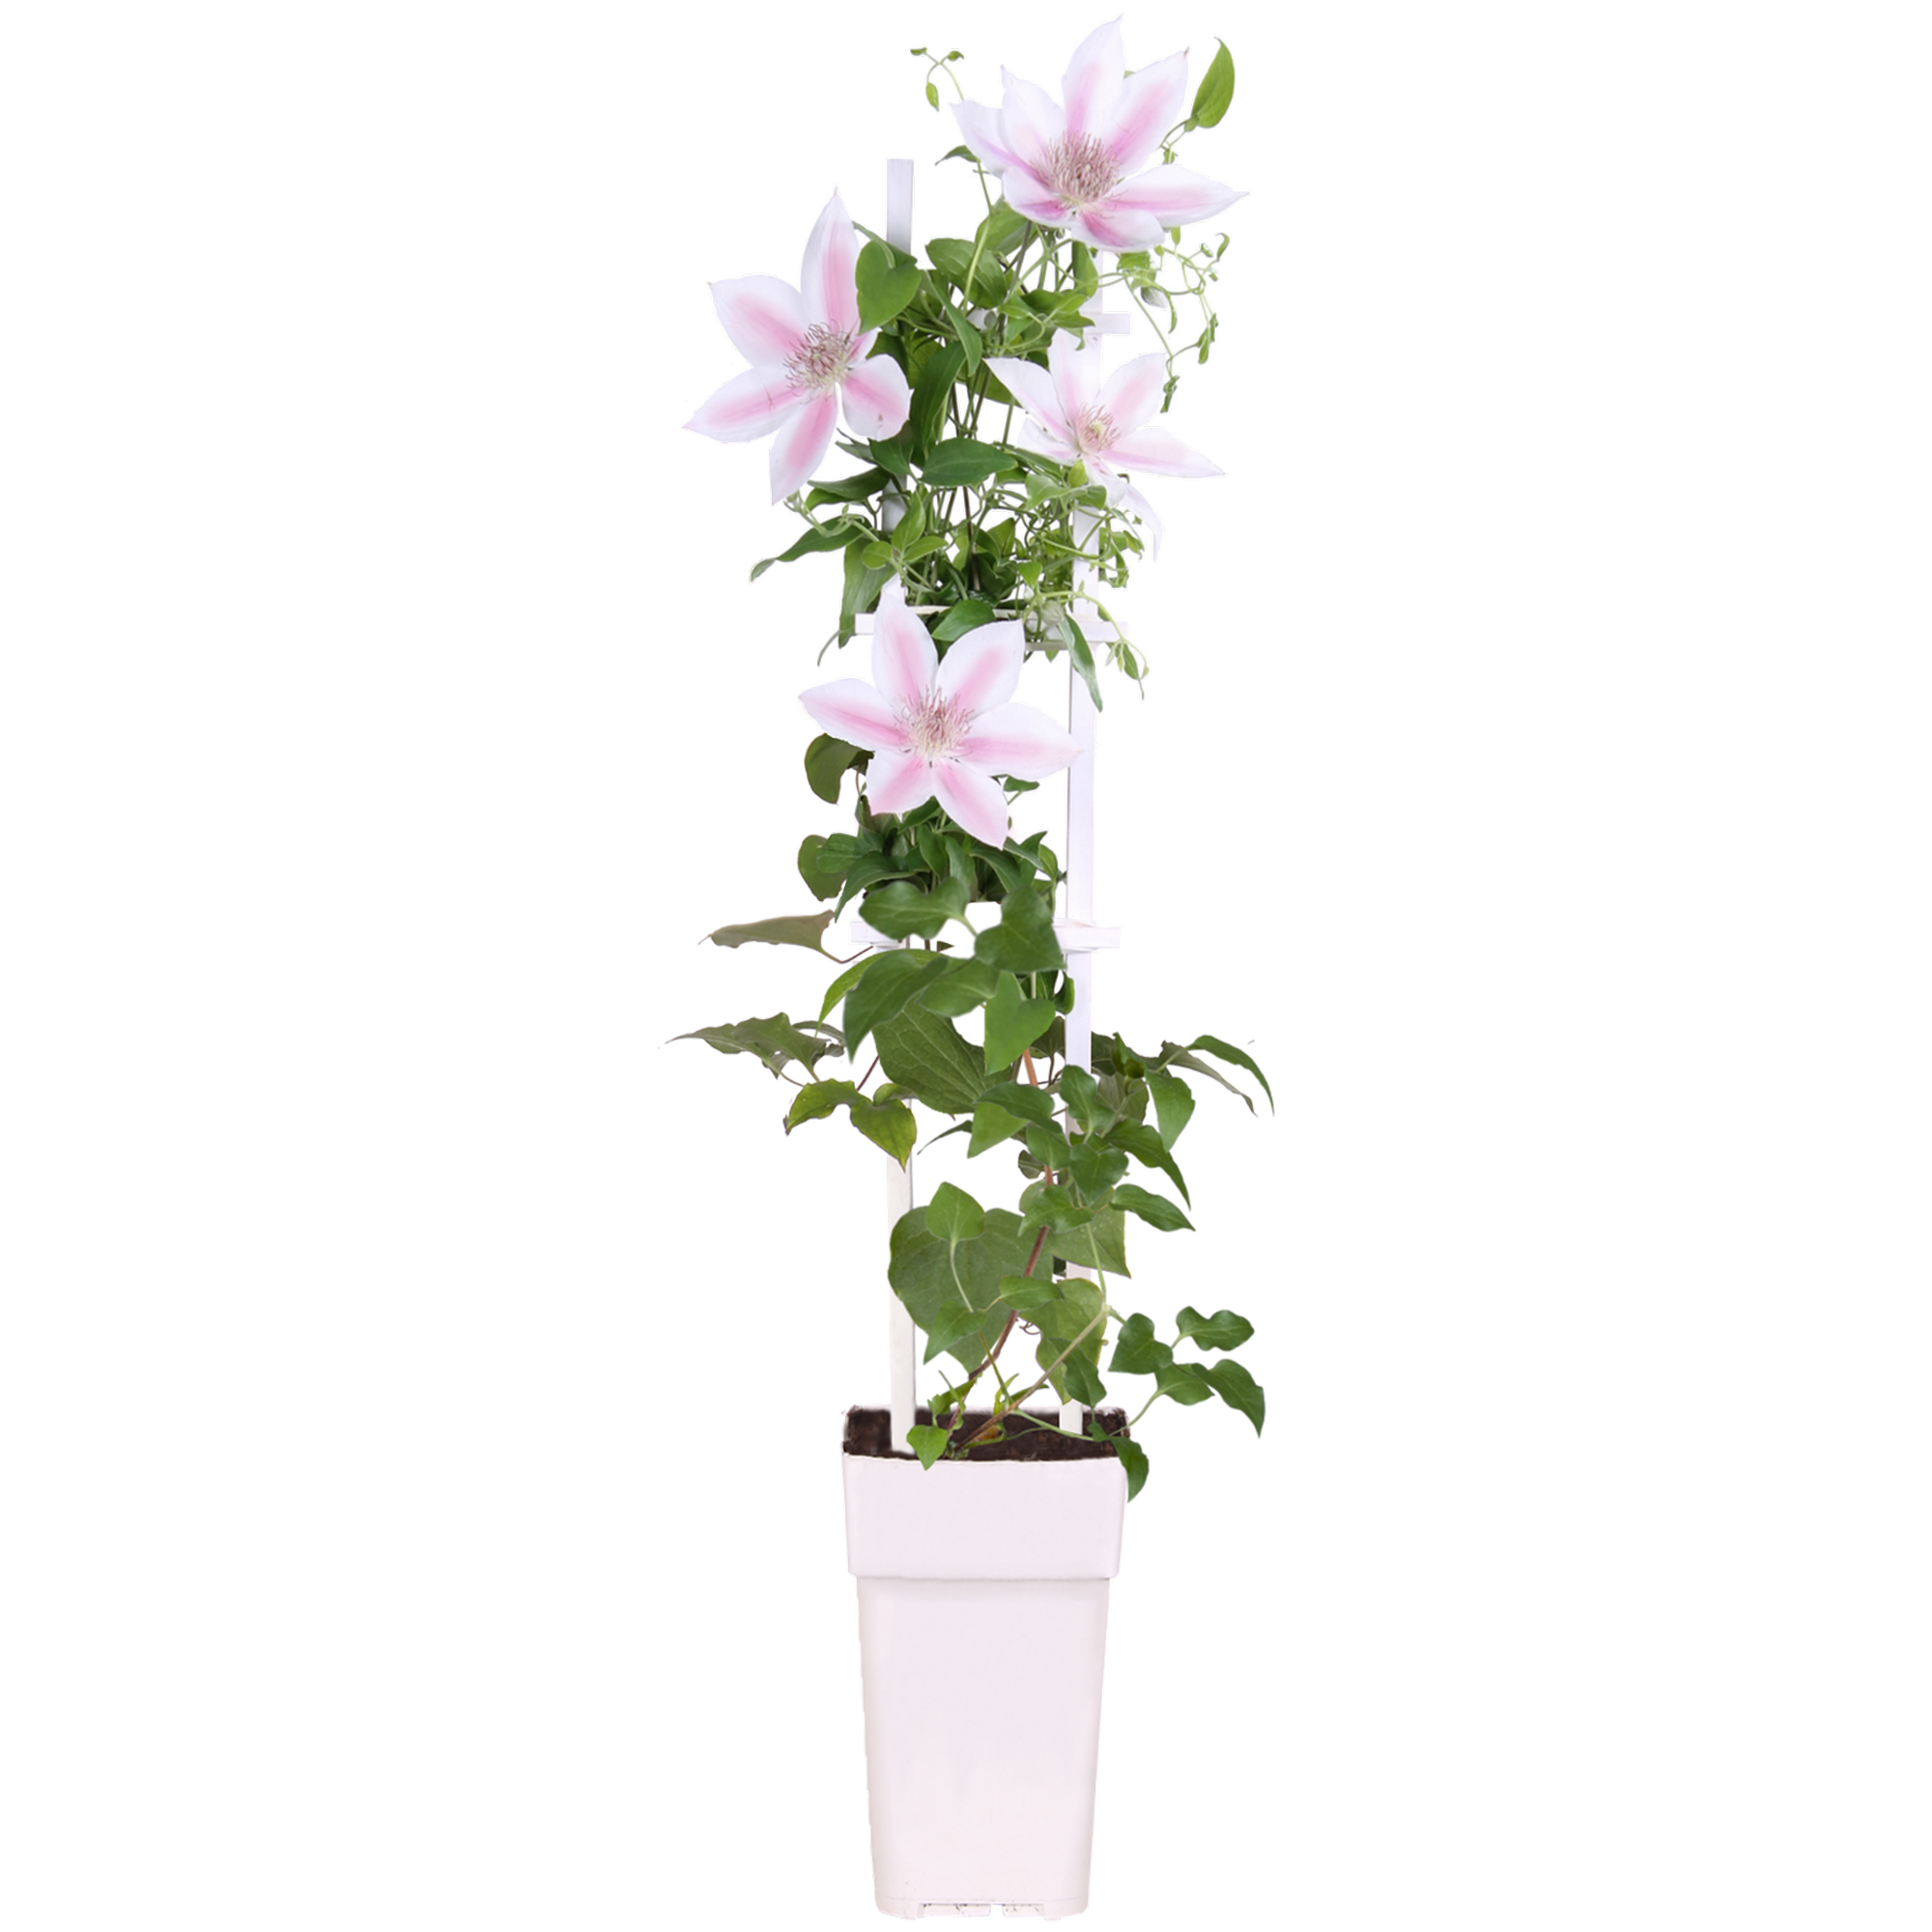 Clematis am Spalier weiß 15 cm Topf + product picture